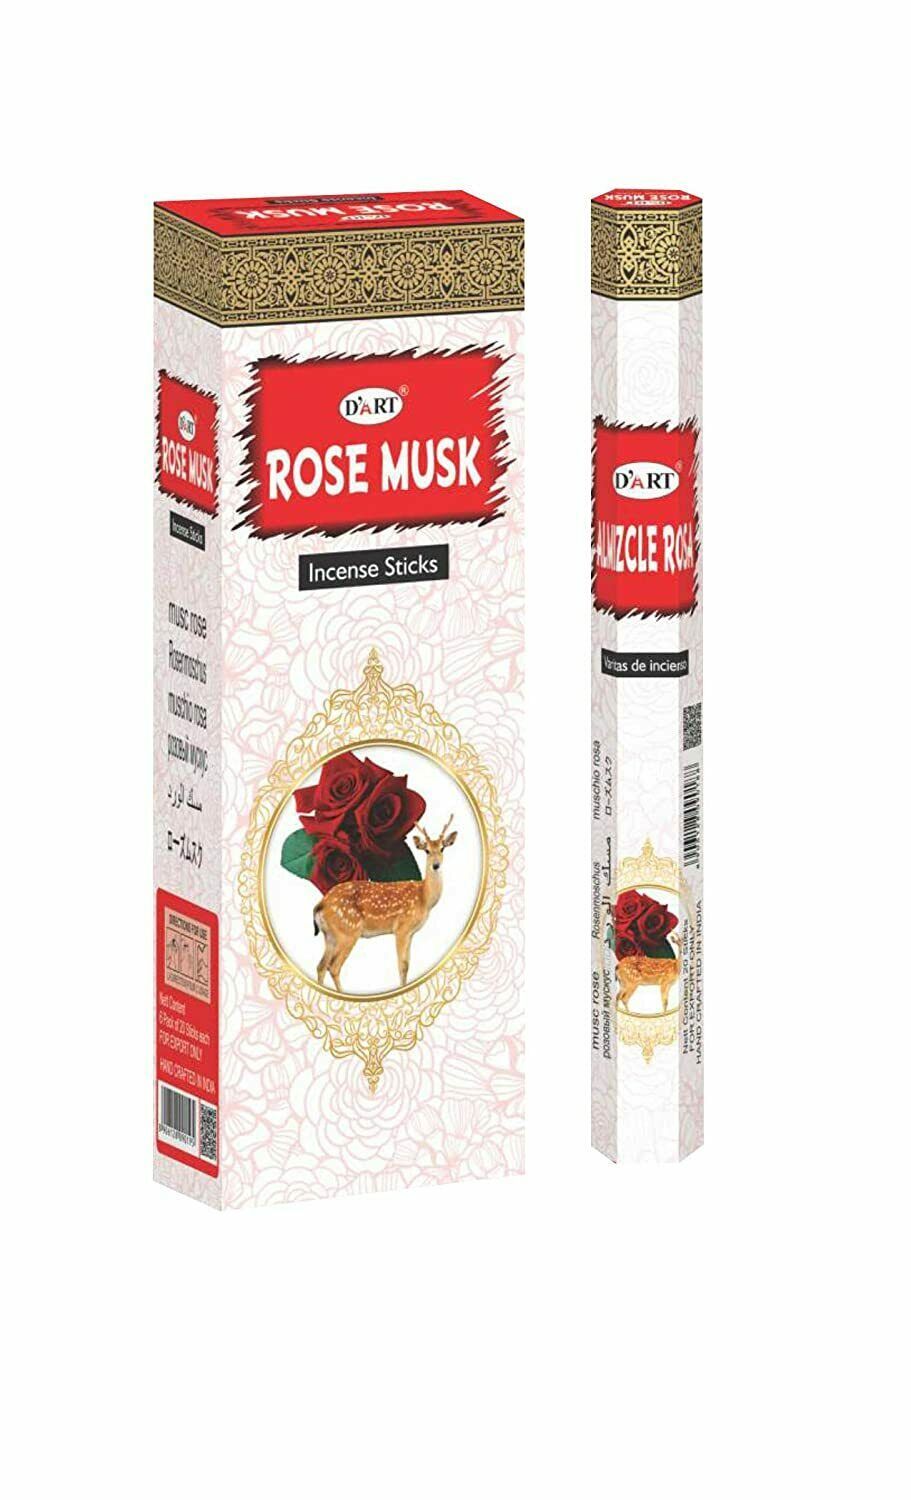 D'Art Rose Musk Incense Stick Export Quality Hand Rolled in India 120 Sticks - $14.23